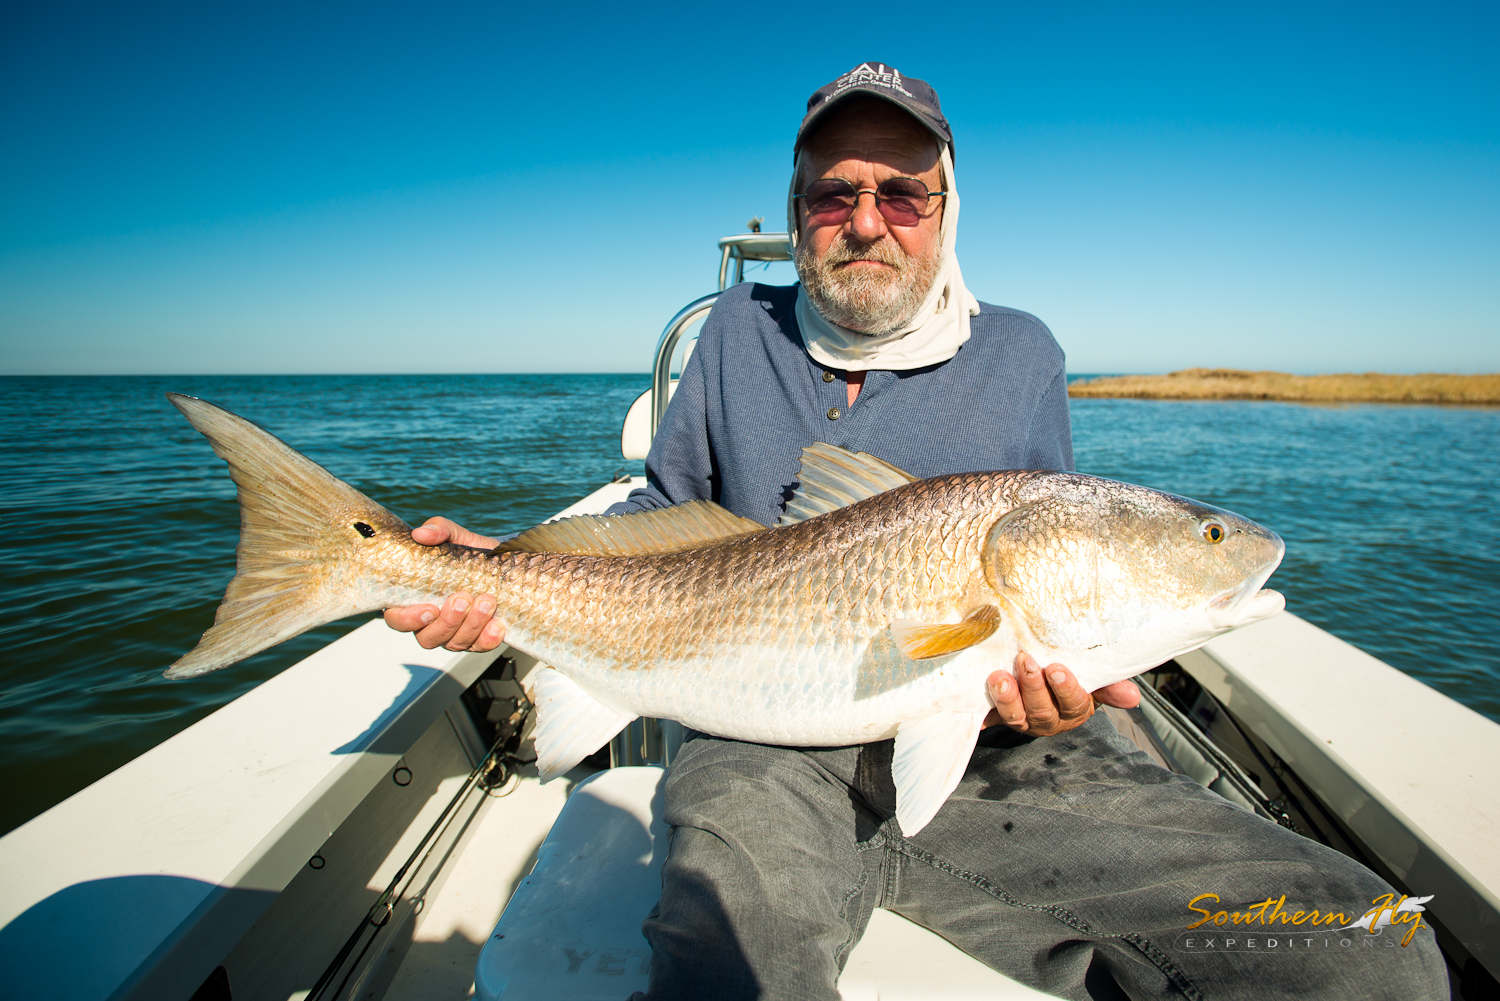 Spin Fishing Vacation Southern Louisiana Southern Fly Expeditions